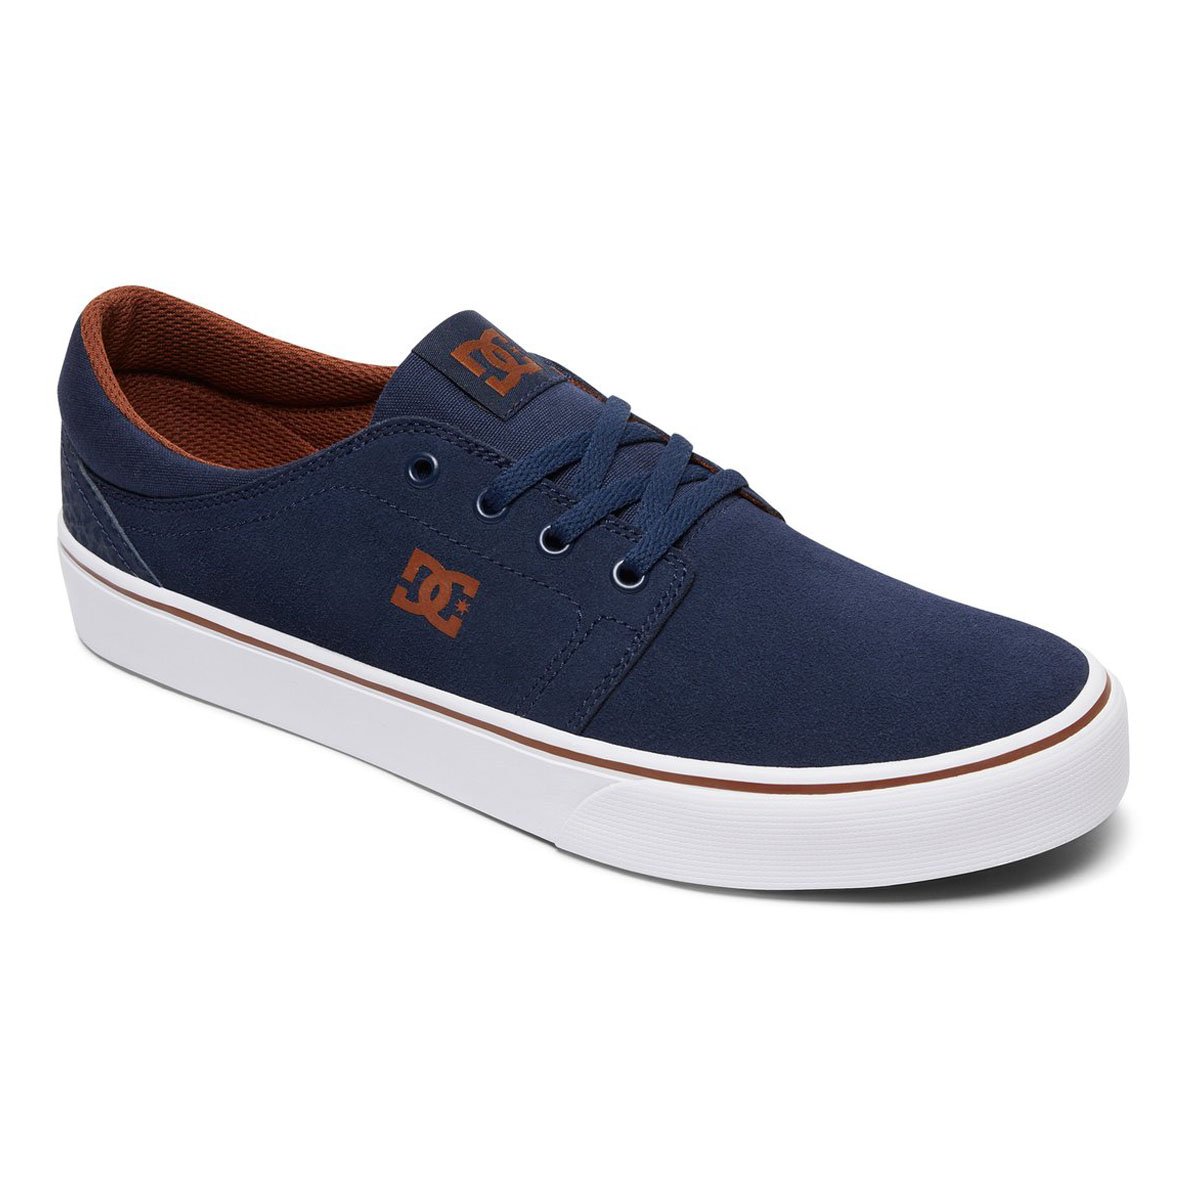 Tenis Trase Sd Dc Shoes - Caballero